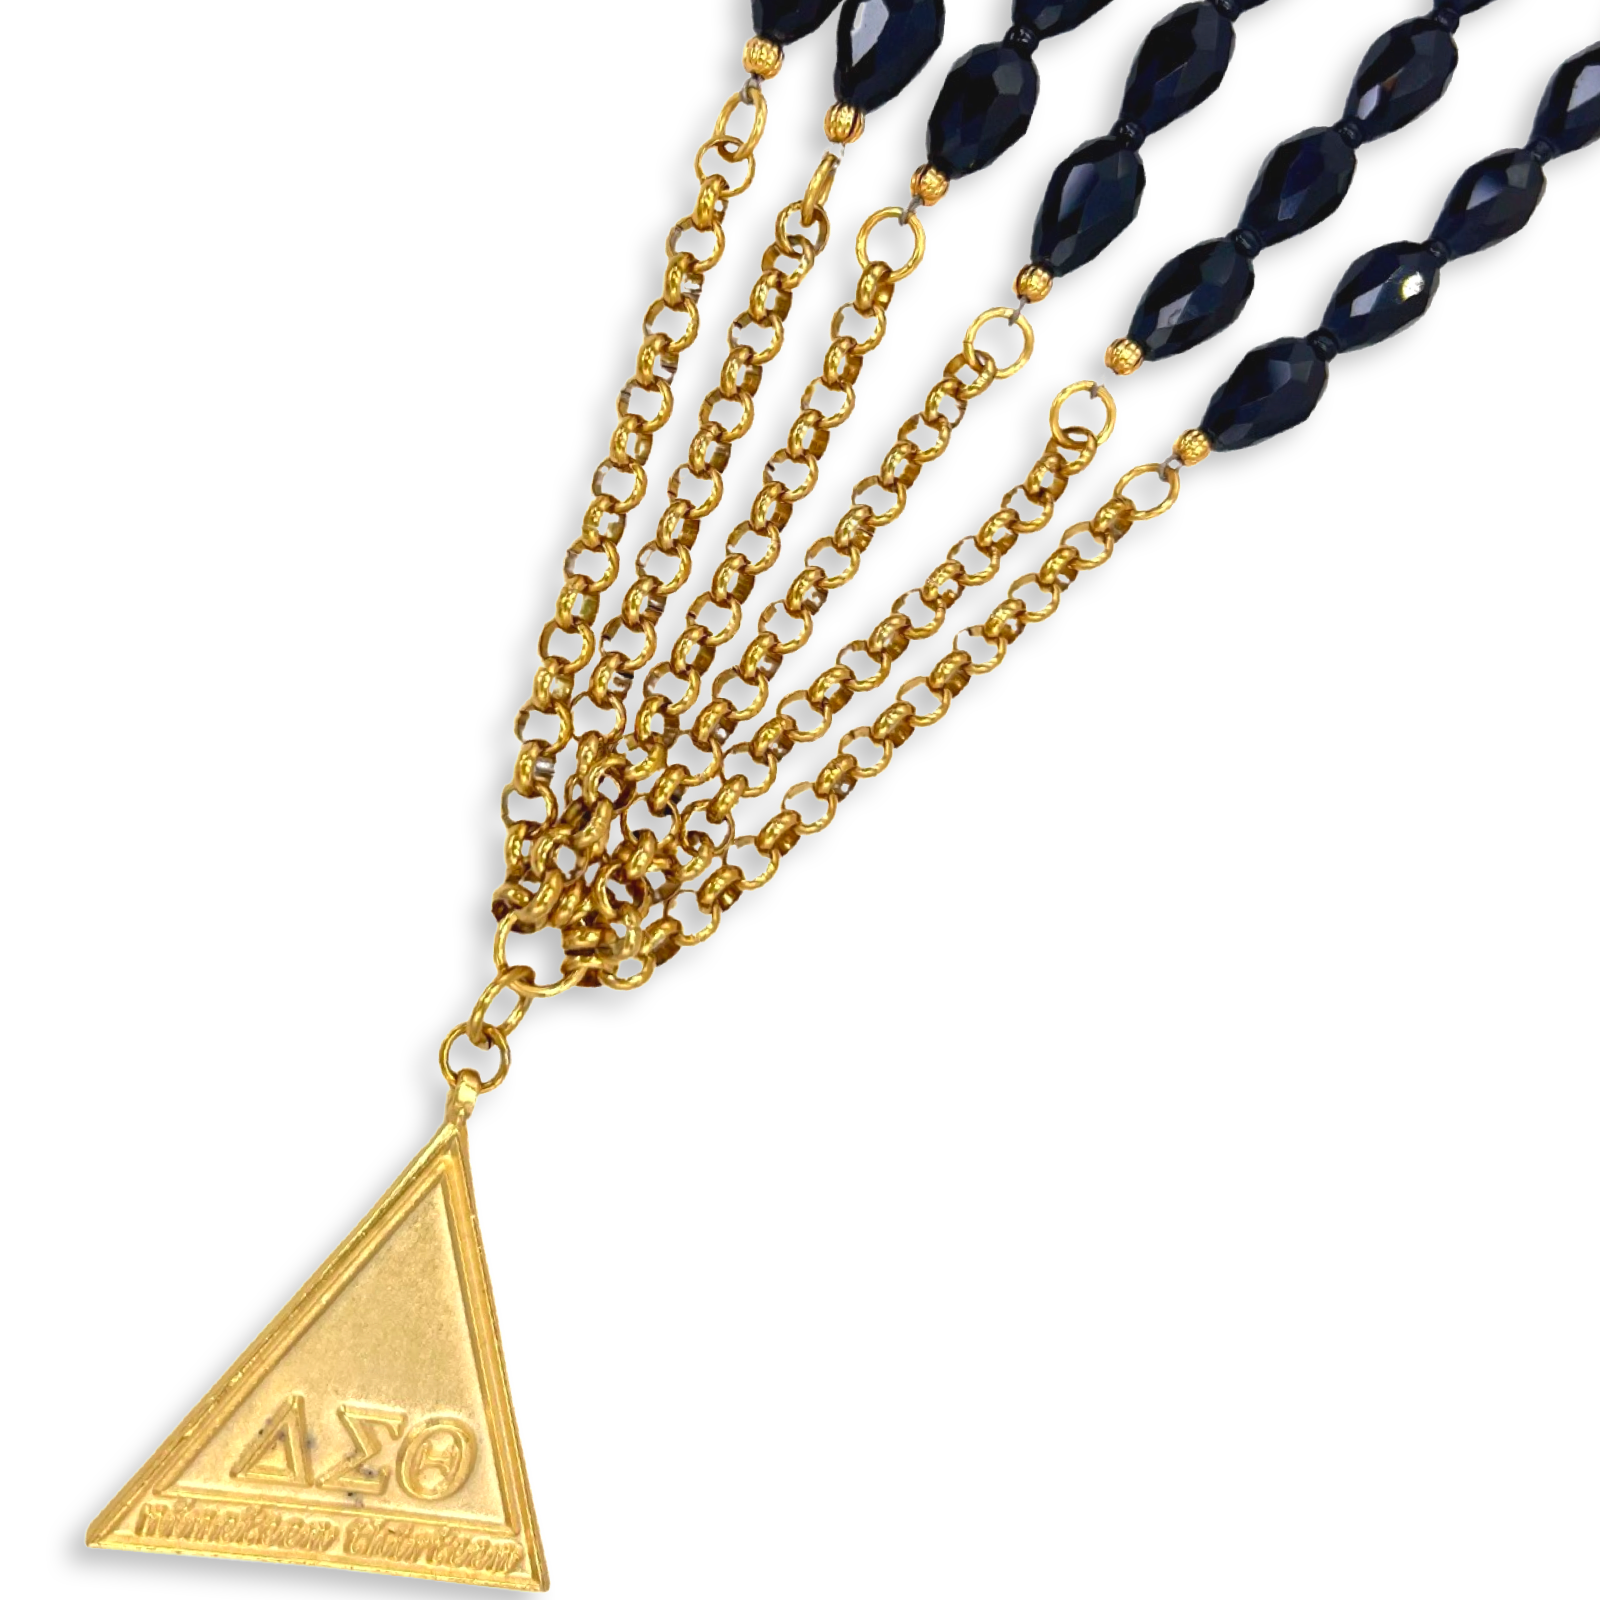 Delta Time Travel Necklace